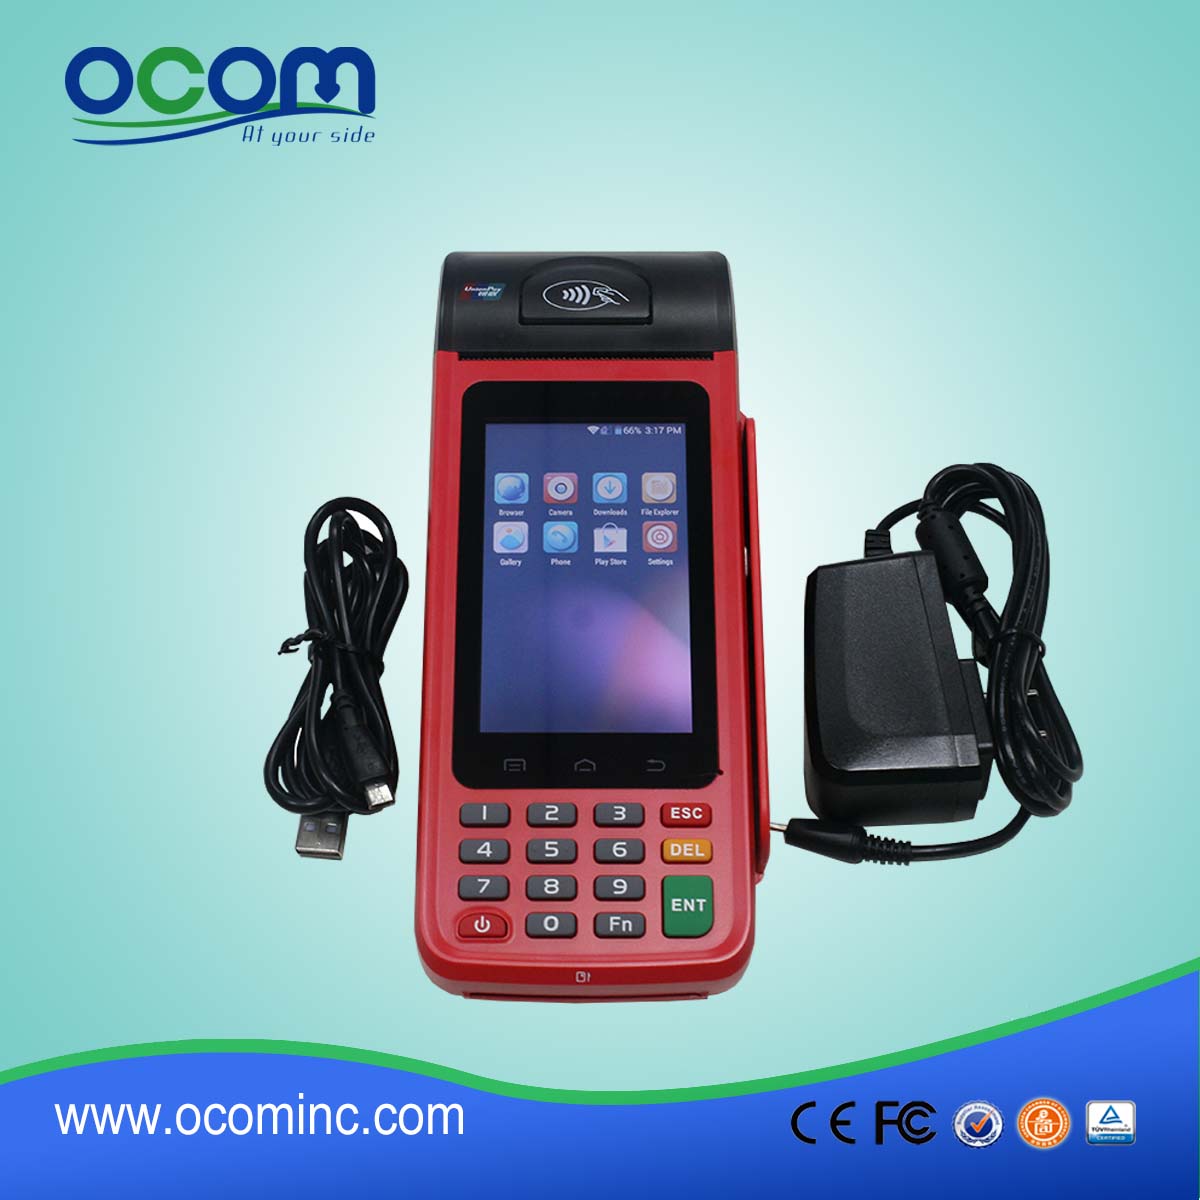 P8000 Handheld 3G Cheap Android Mobile Top-up POS Devices